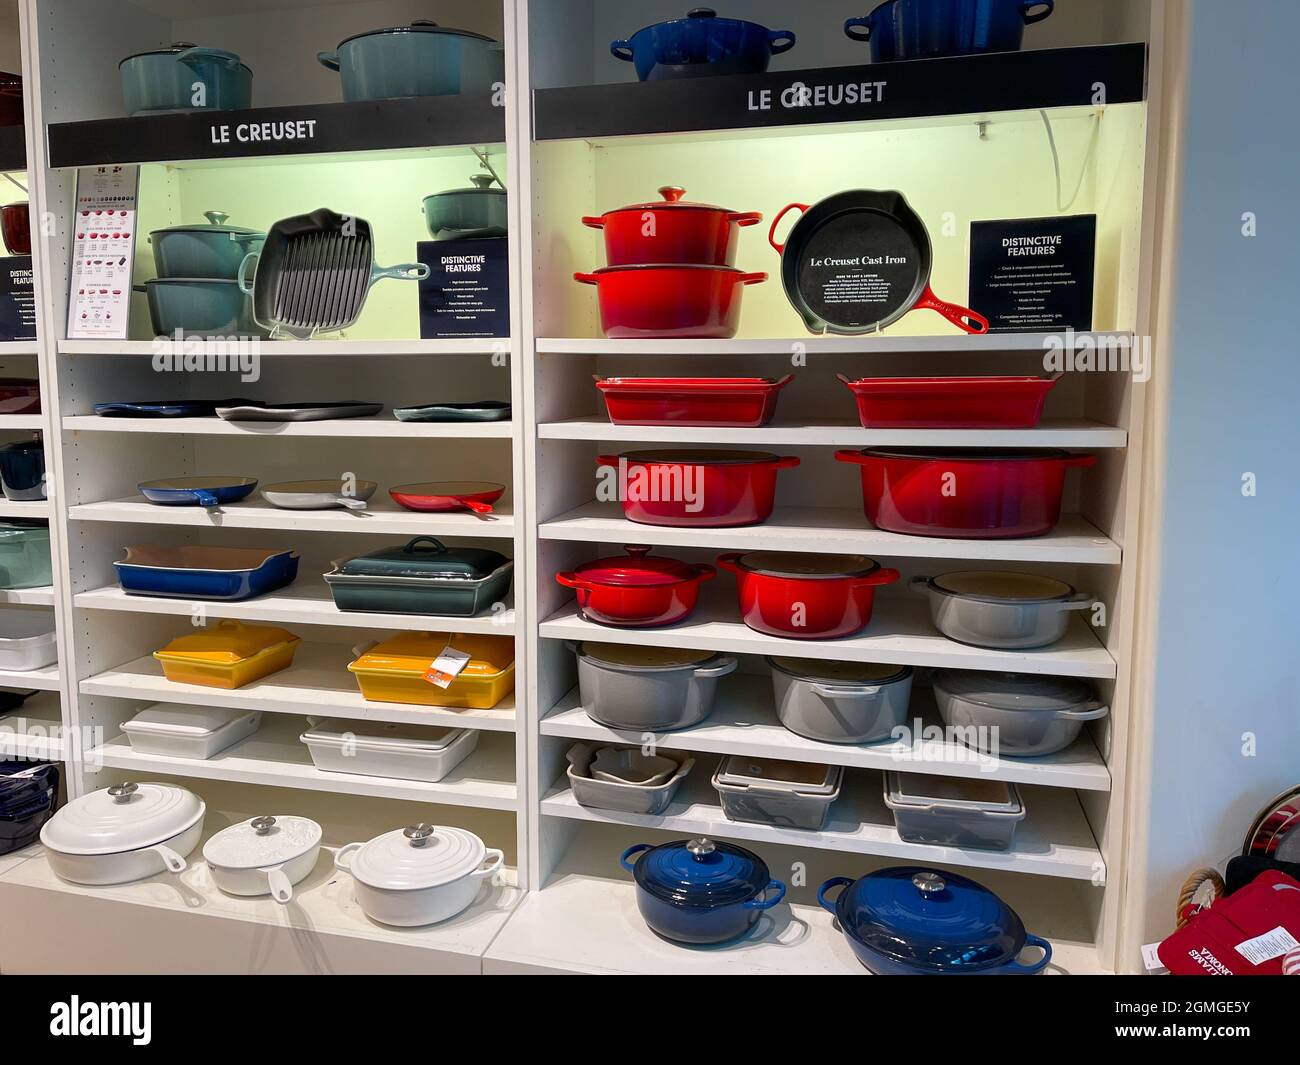 Orlando, FL USA - September 9, 2021: The Le Creuset pot and pan aisle at a  Williams Sonoma store at an indoor mall in Orlando, Florida Stock Photo -  Alamy